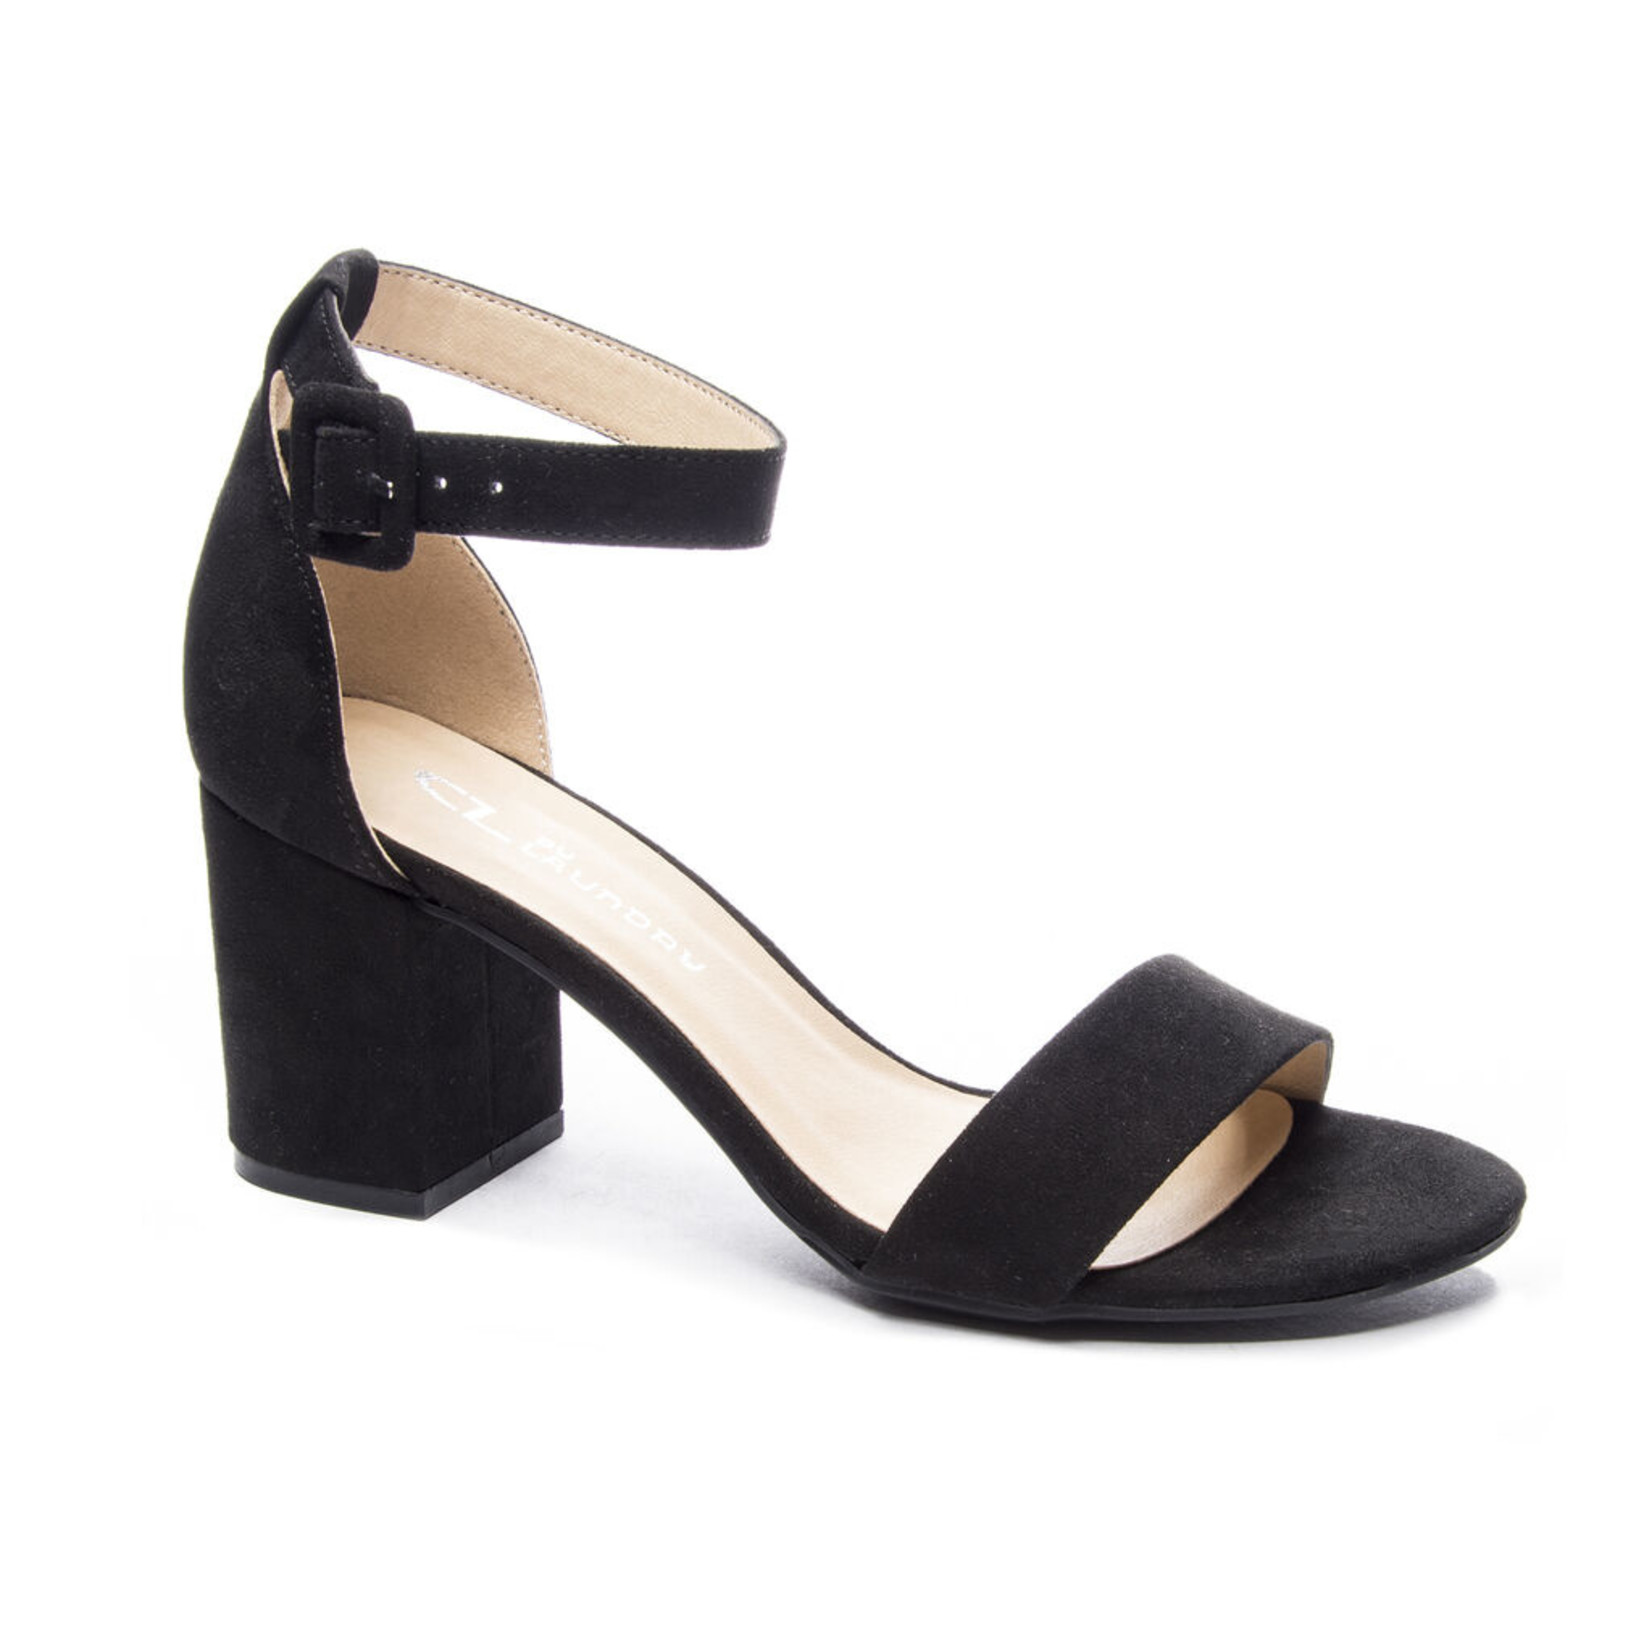 Jody Black Super Suede CL by Laundry